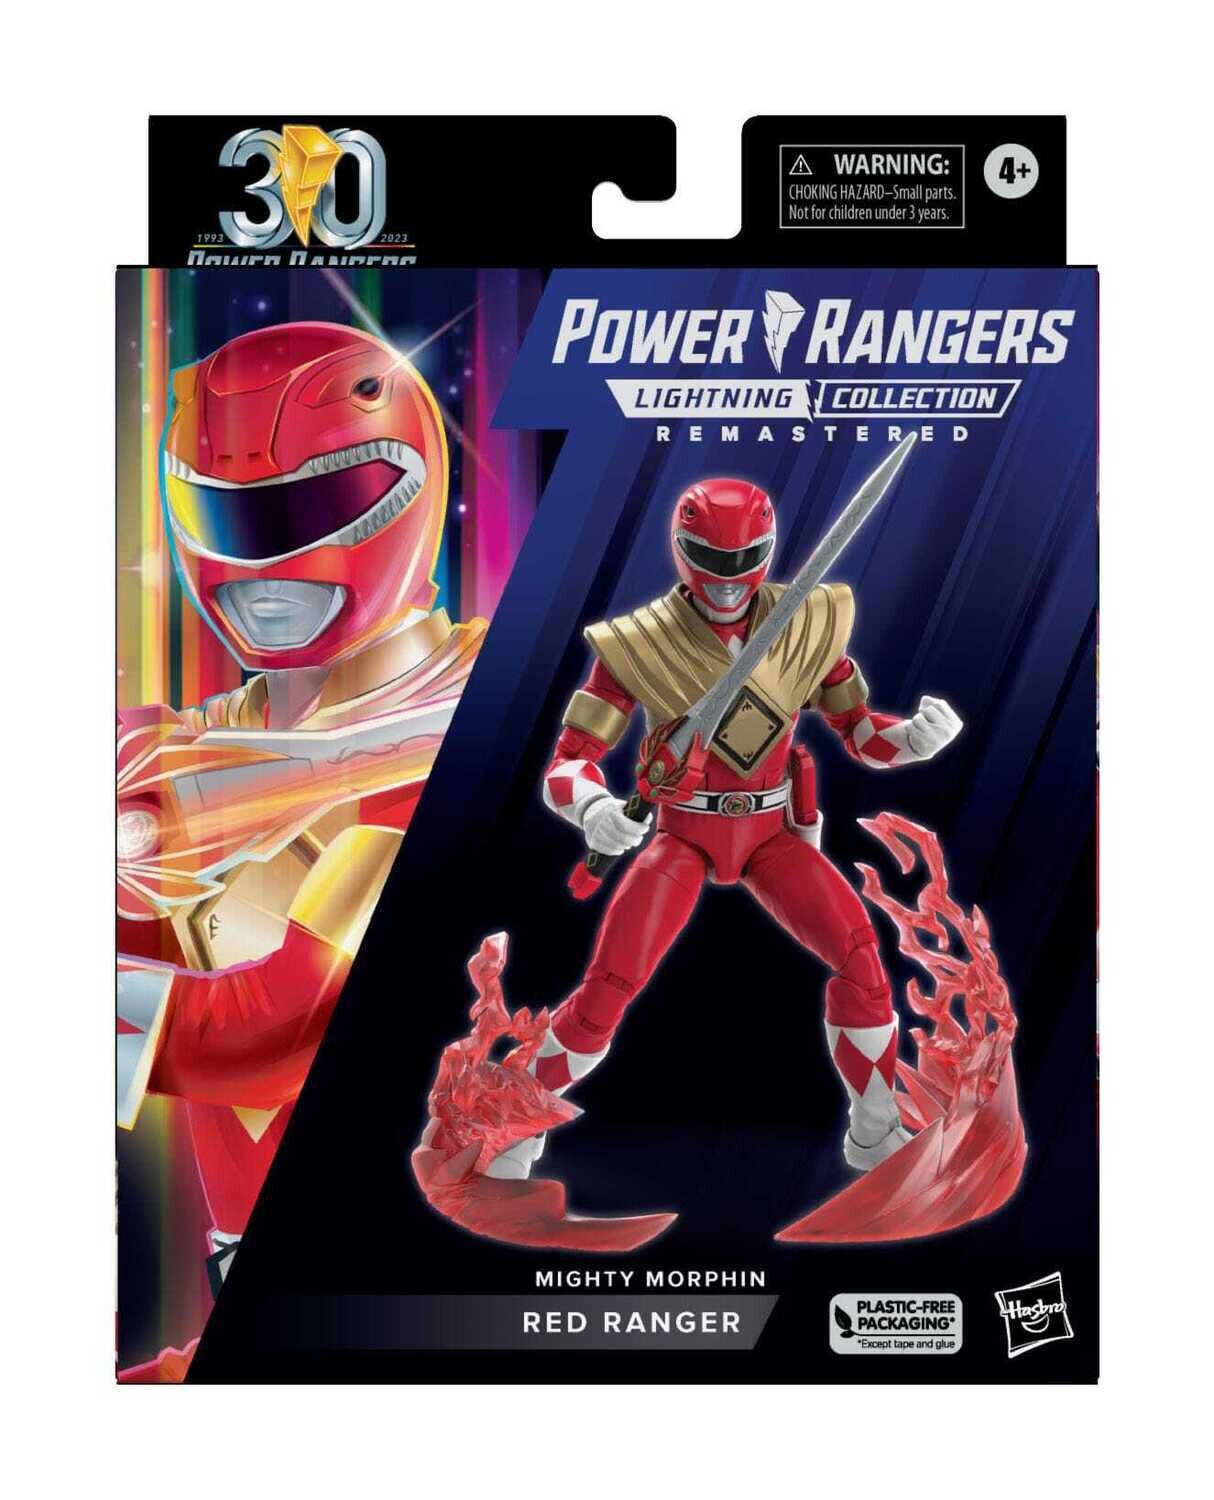 PREORDER: Power Rangers Lightning Collection Remastered Action Figure Mighty Morphin Red Ranger 15 cm